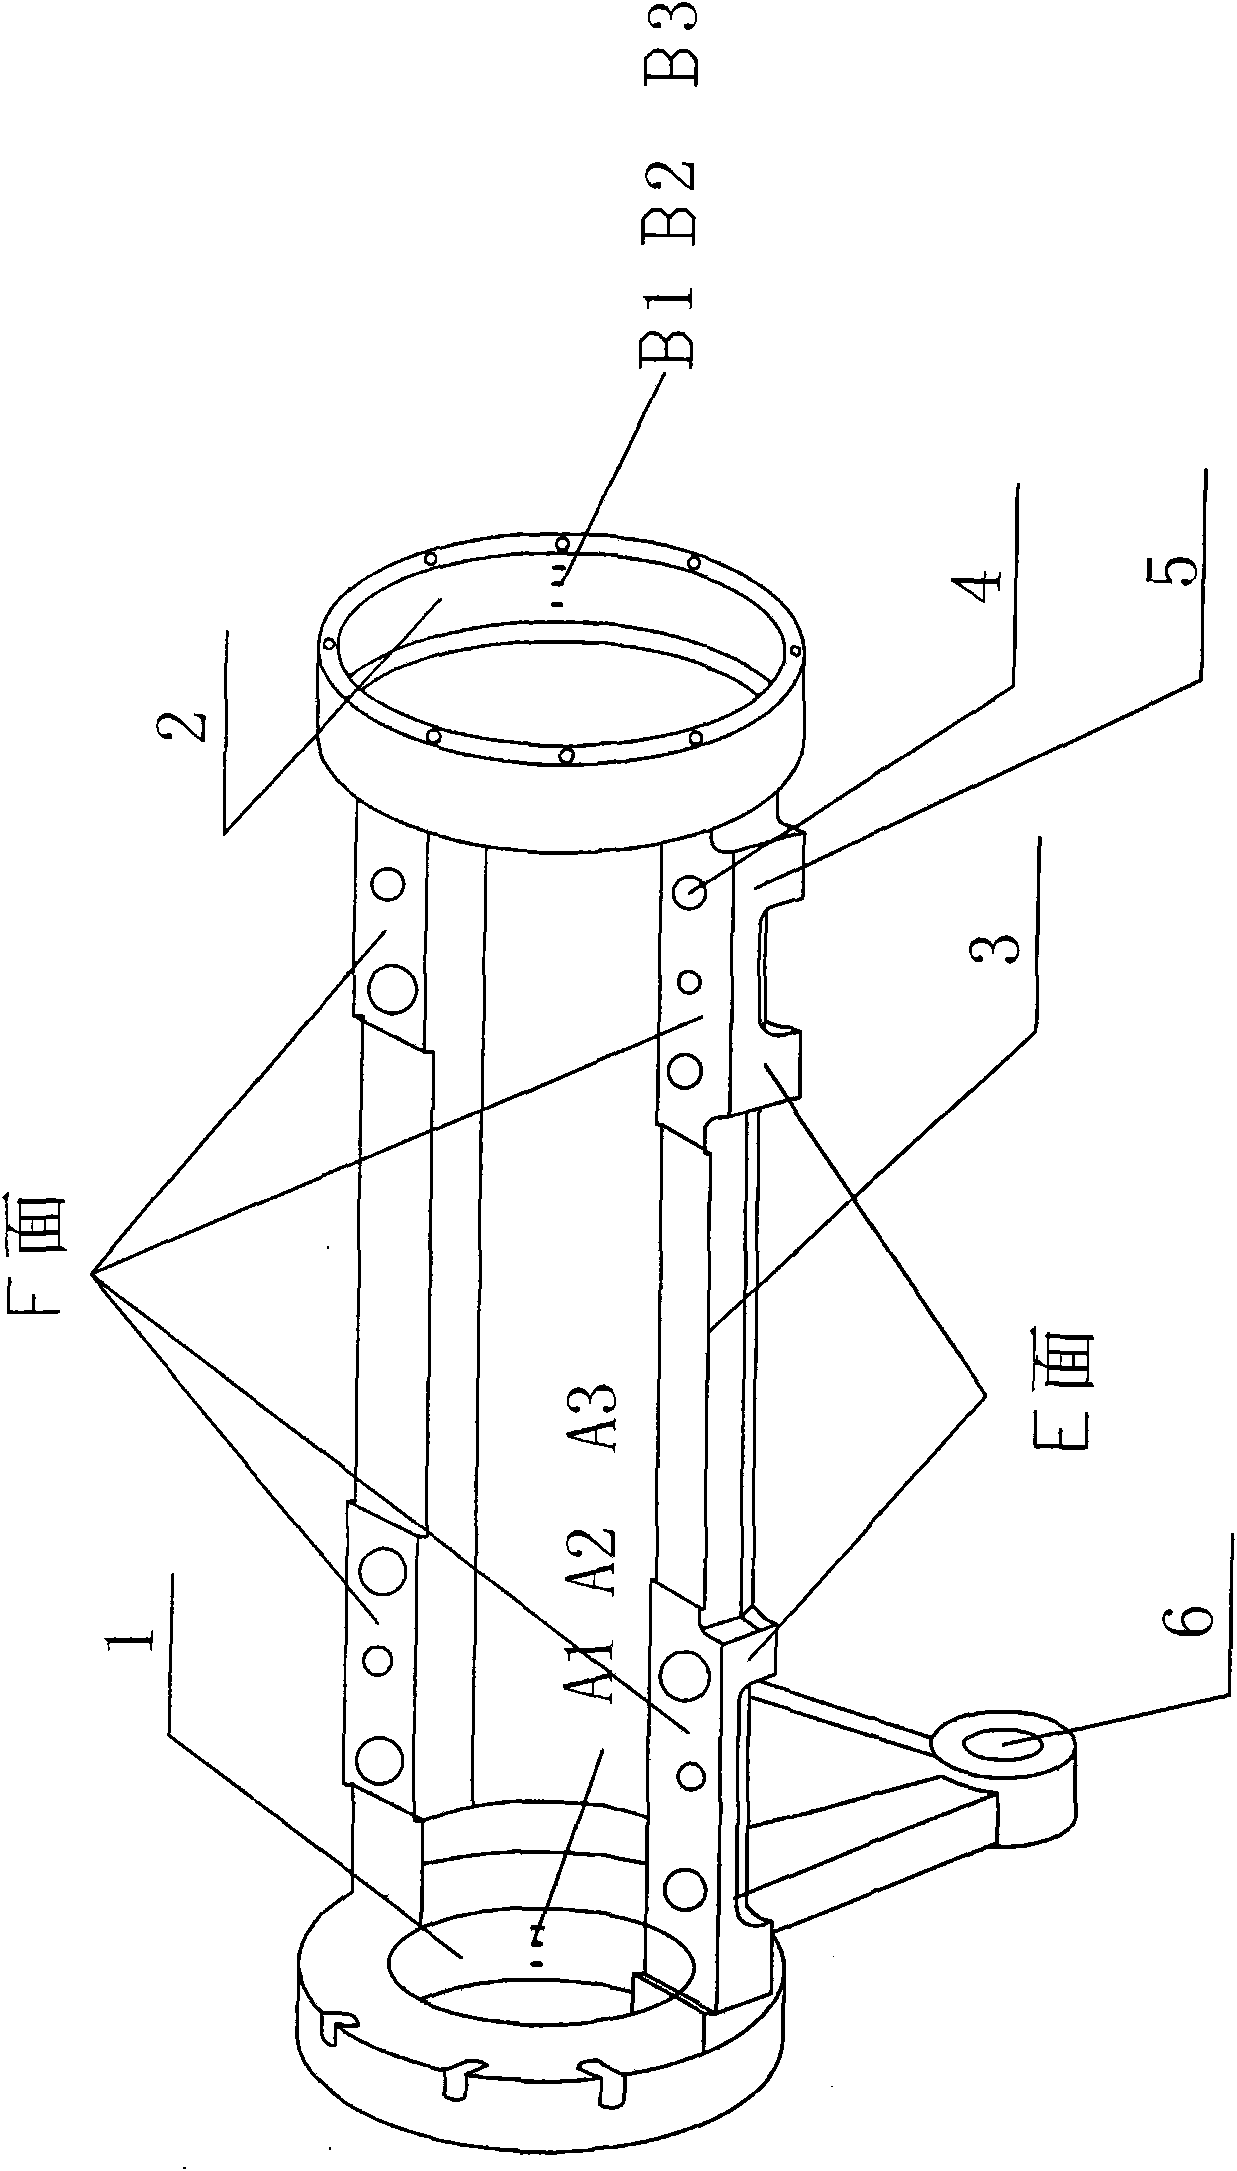 Method for measuring bearing hole concentricity of axle-hang box of locomotive